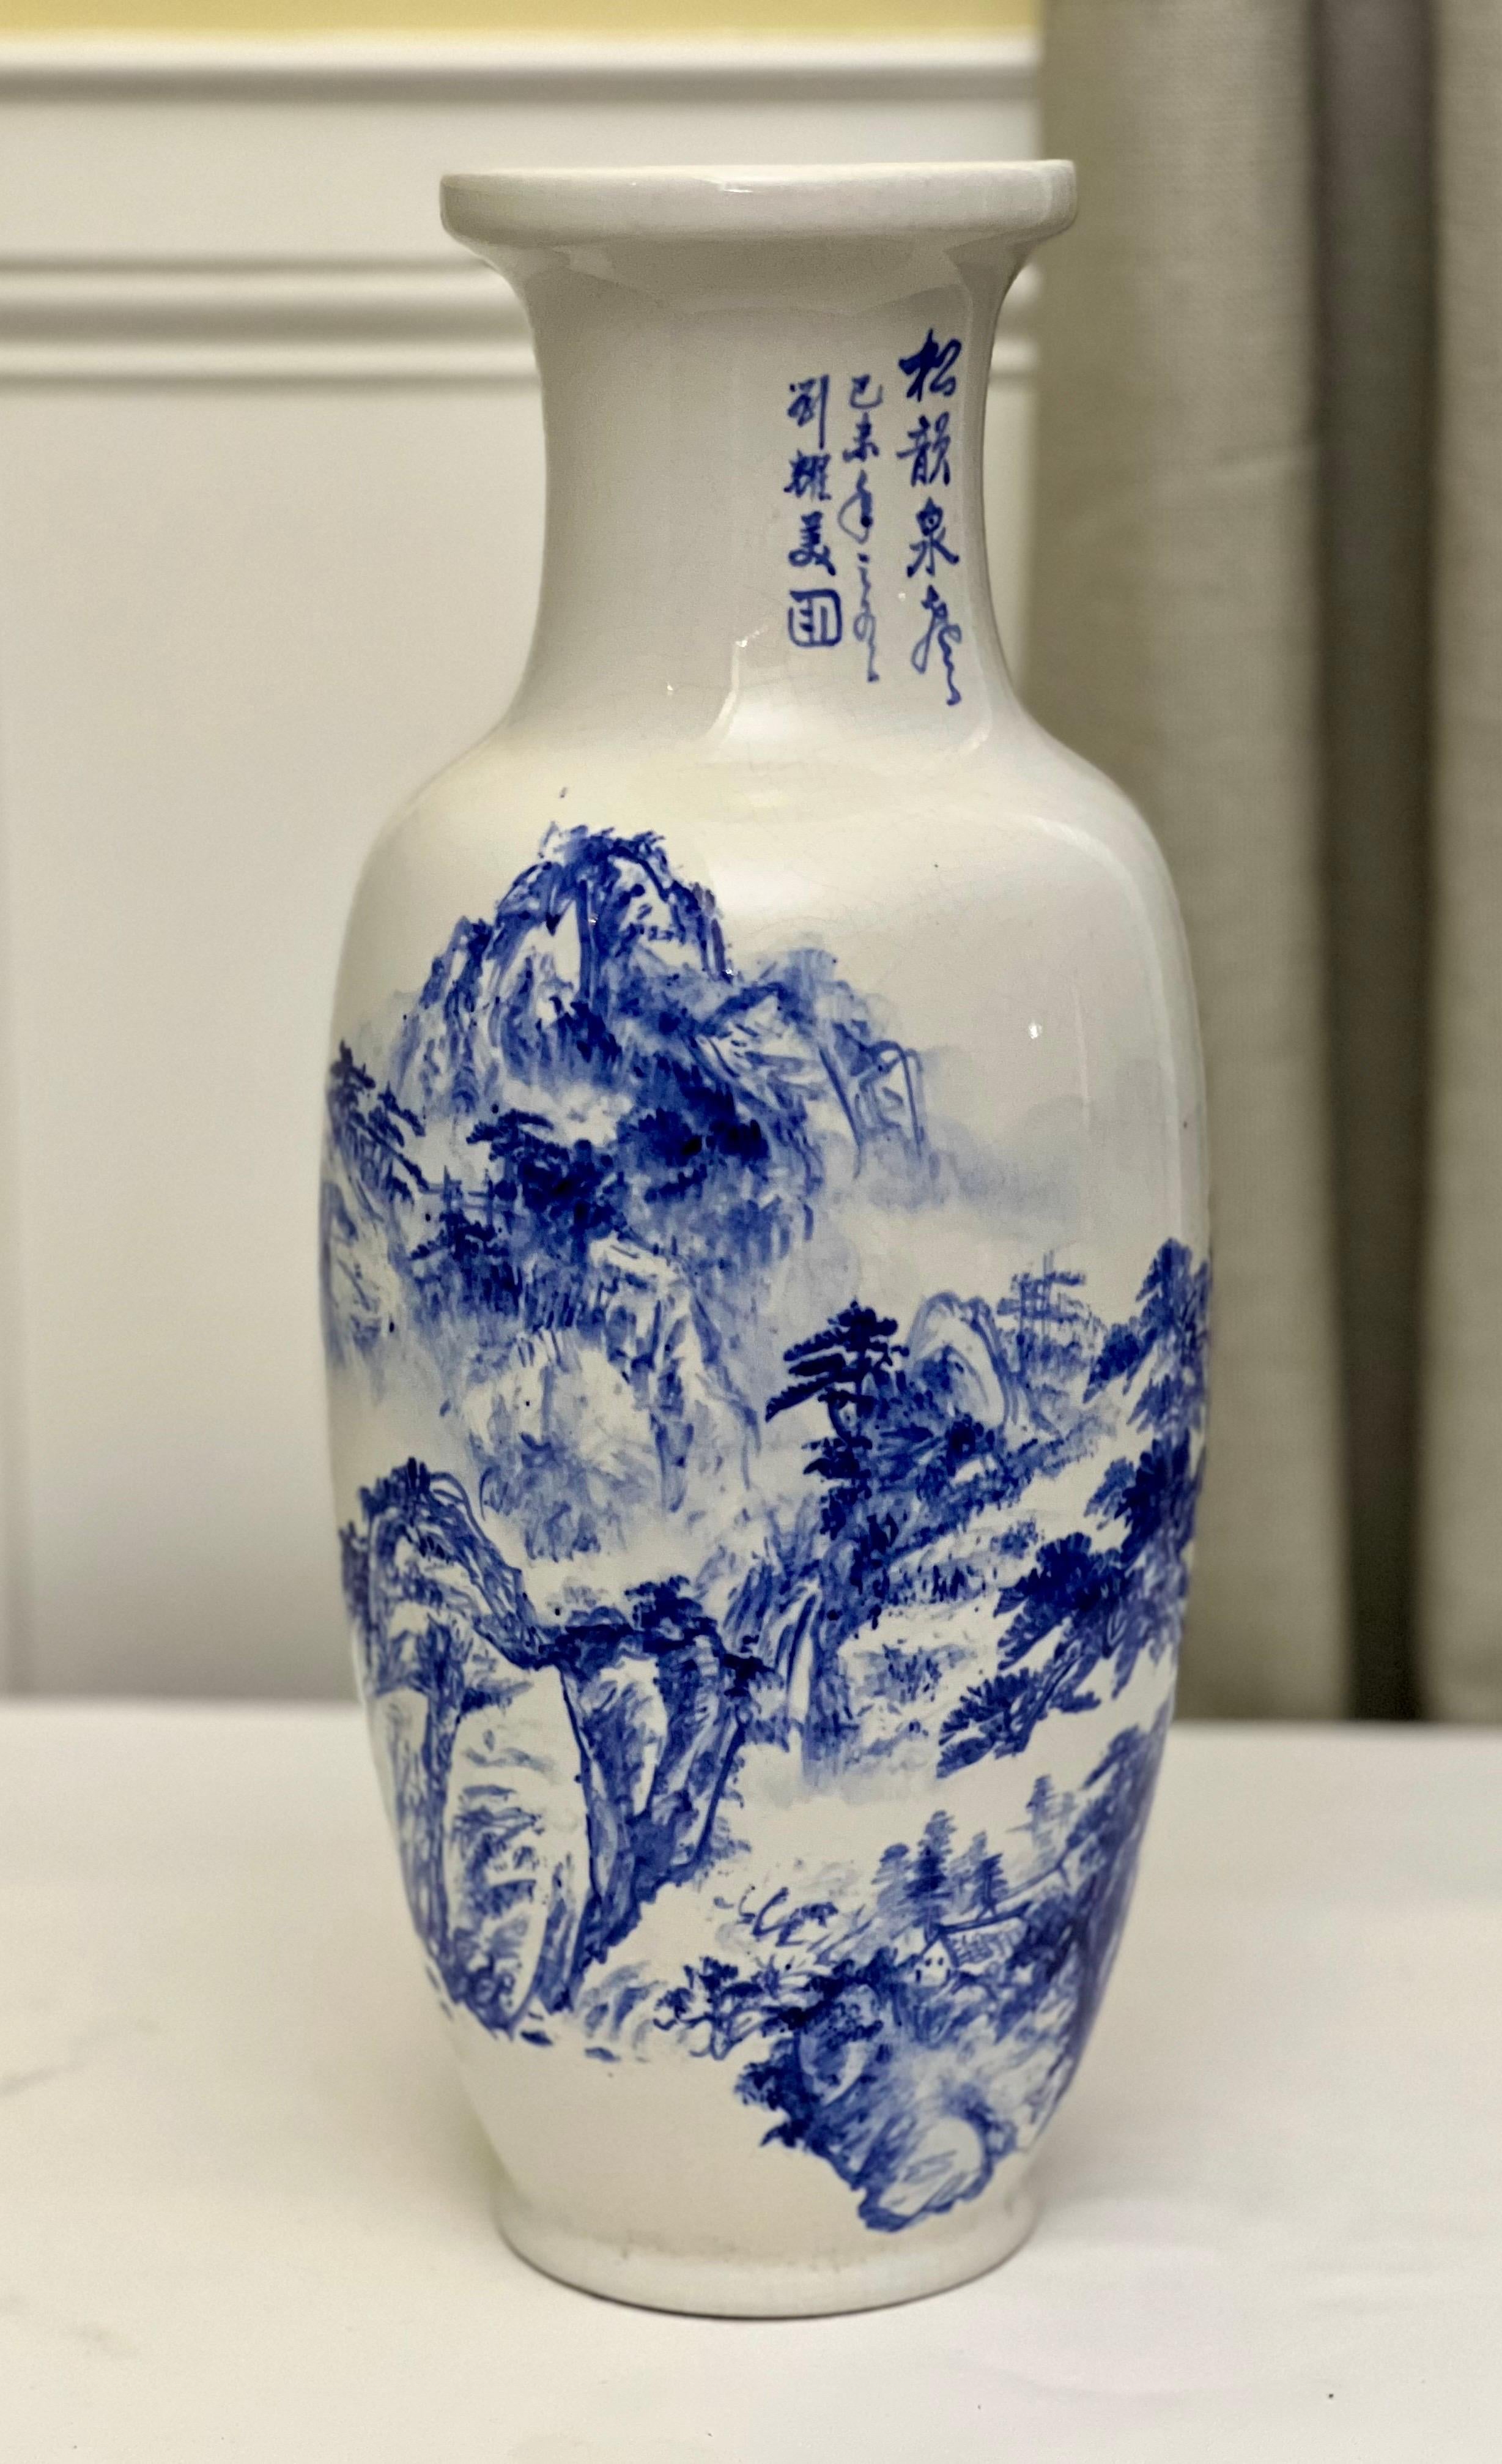 Blue and white baluster form porcelain vase with Zhongfeng mark on base, c. 1960s.

Beautiful vase with a sweeping mountainous scene and unique calligraphy script. A unique Chinese poem is on the neck. It is in good condition, no cracks or chips.